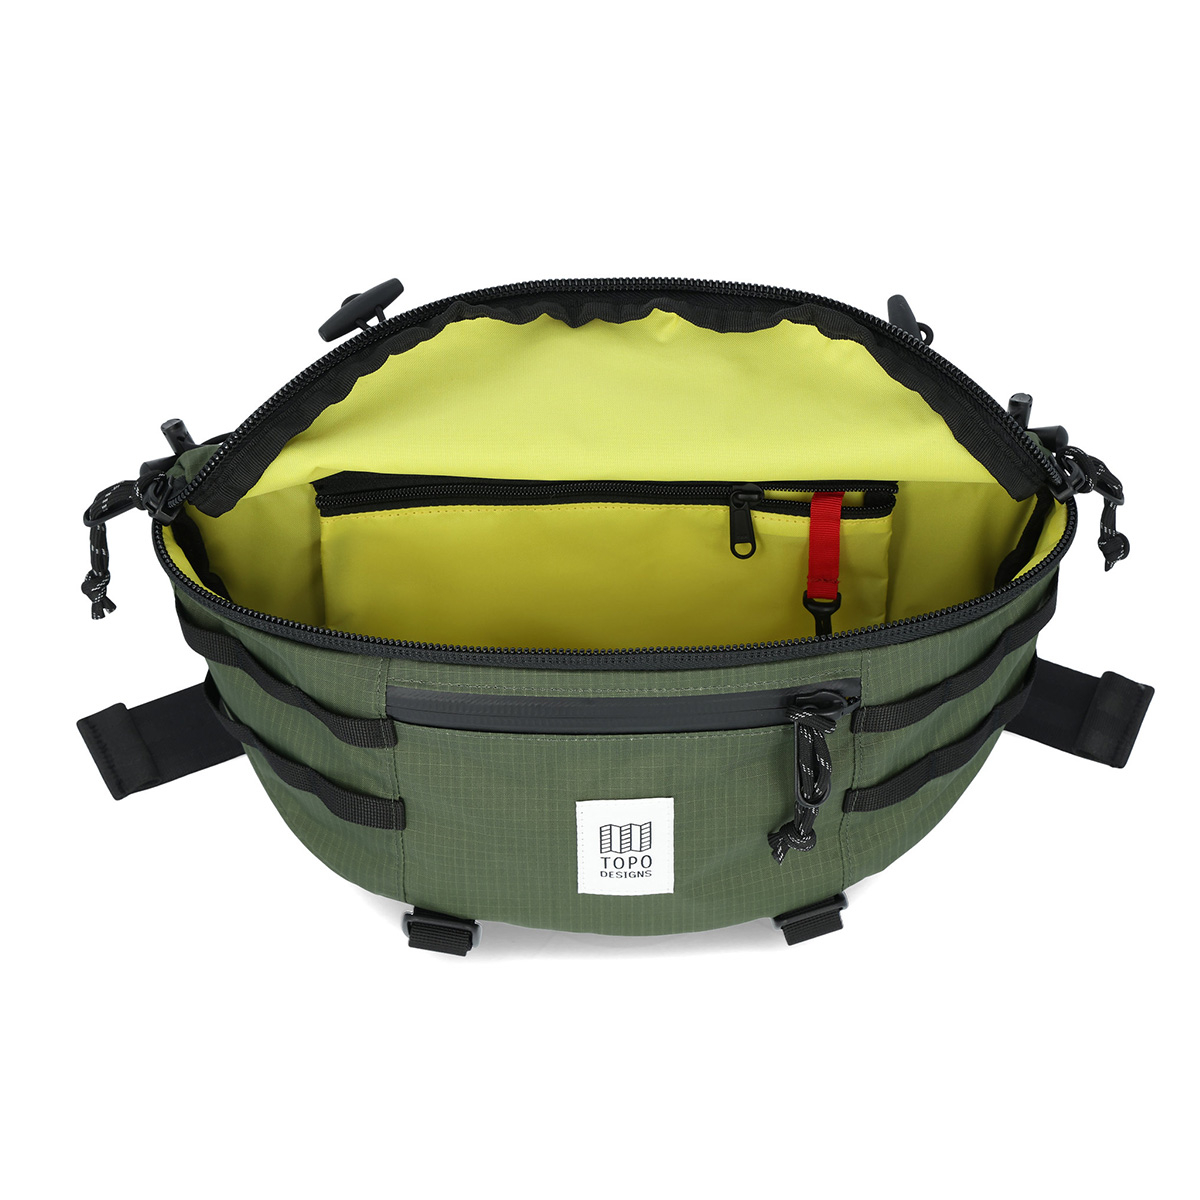 Topo Designs Mountain Sling Bag Olive, spacious main compartment, smaller organizational pockets, bright interior lining